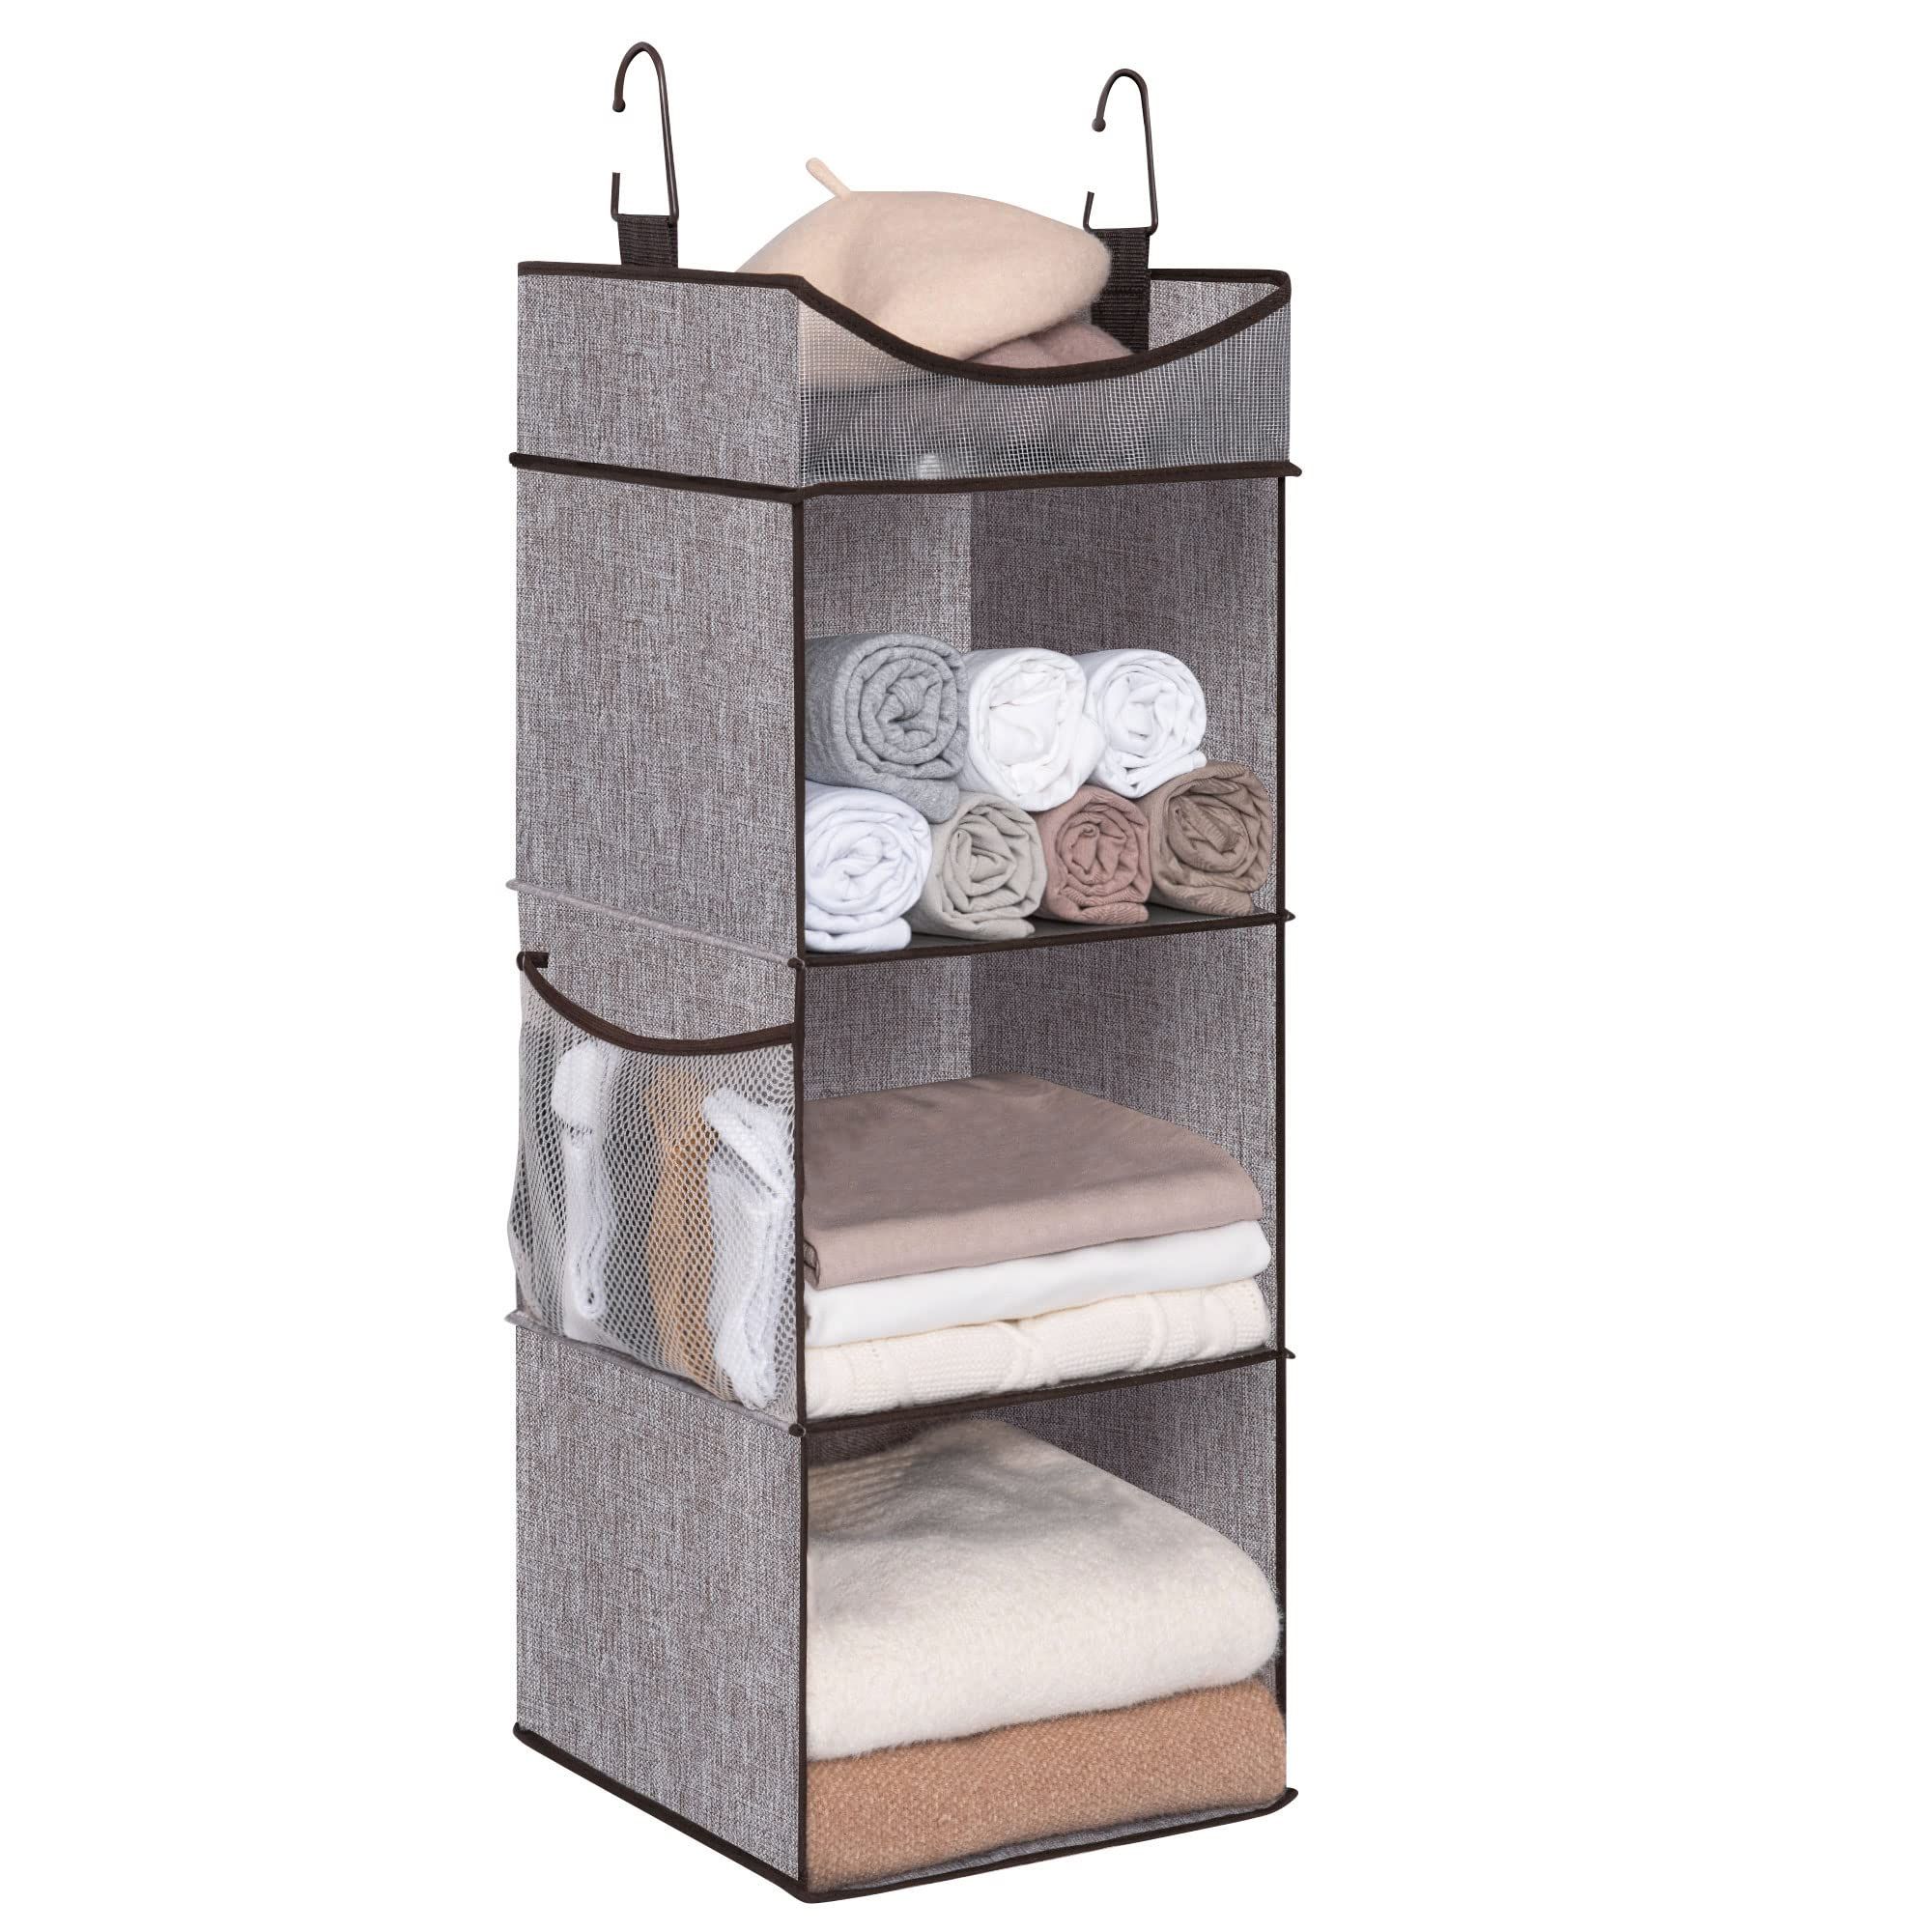 3 Shelf Hanging Shelves Wardrobes For Favorite Amazon: Storageworks Hanging Closet Organizer, 3 Shelf Hanging Closet  Shelves With Top Shelf, 12" W X 12" D X 35 ¼"h, Extra Large Space, Mixing  Of Brown And Gray : Home & Kitchen (View 6 of 10)